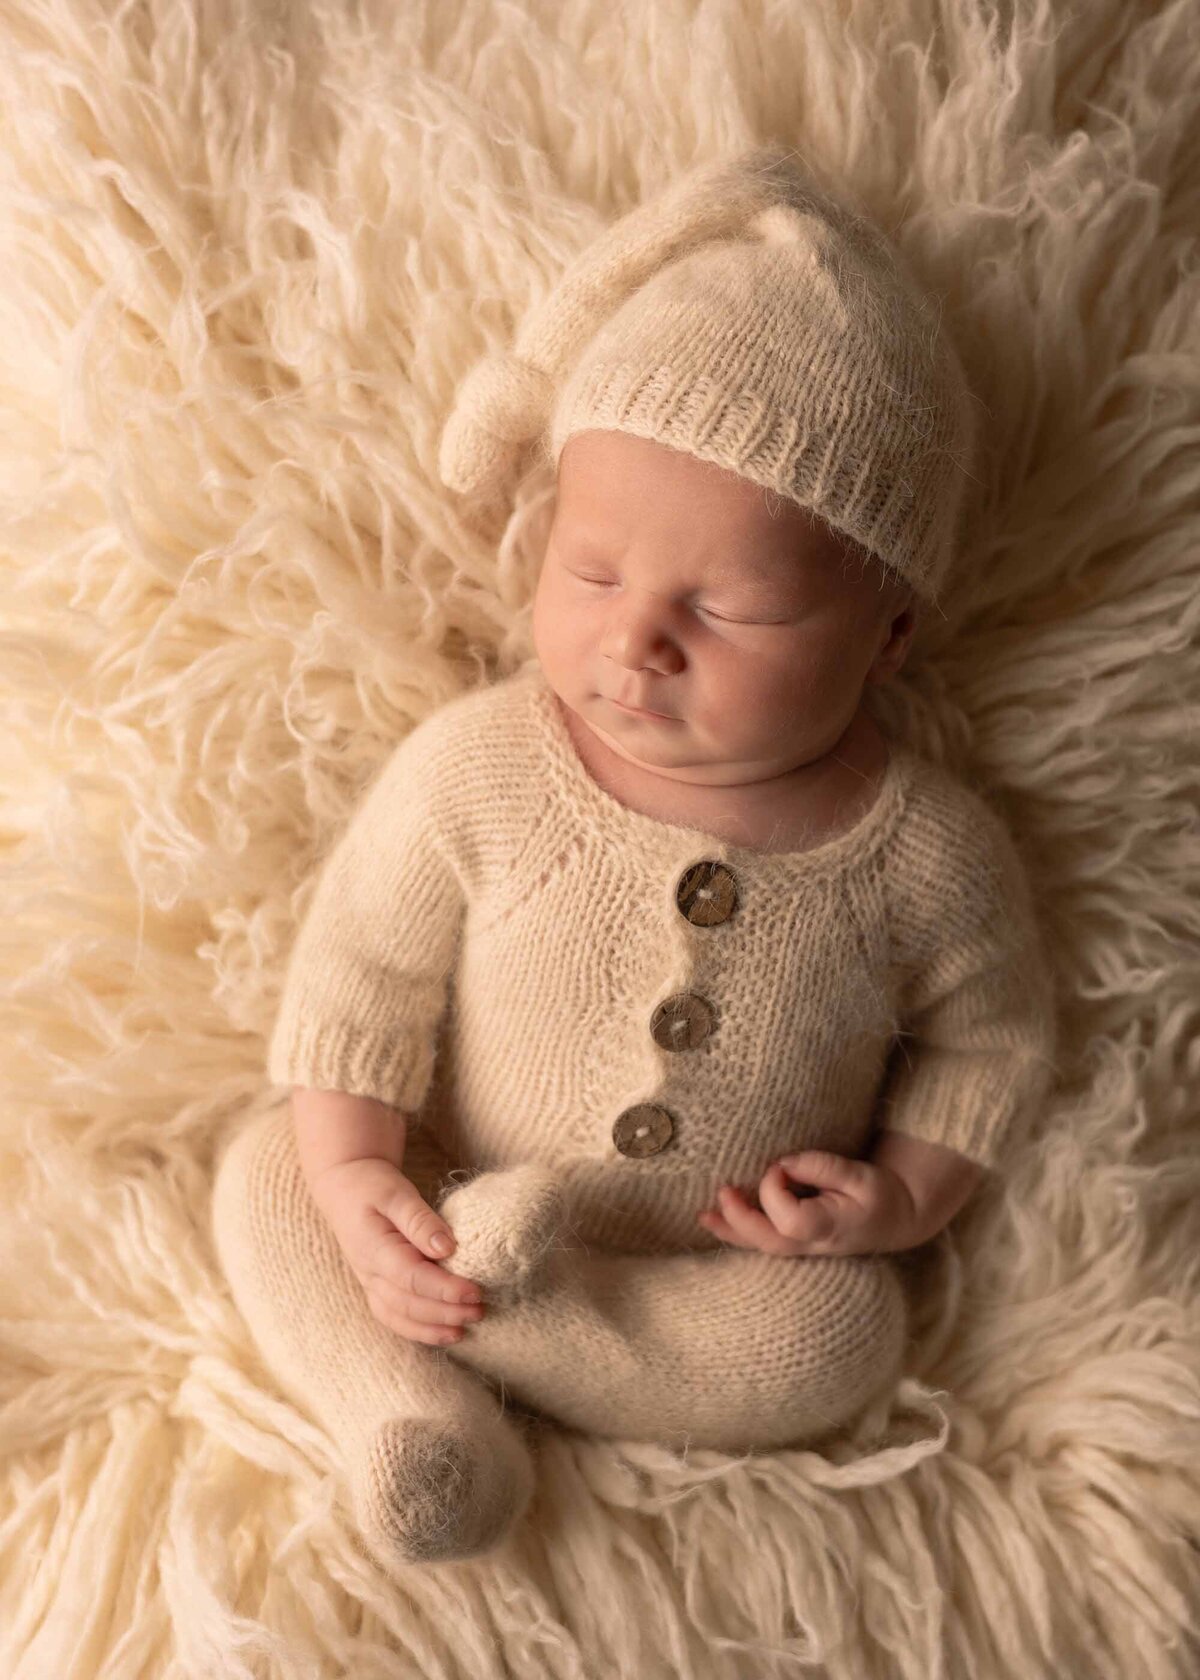 Maddie Rae Photography baby sleeping. he is wearing a neutral outfit and is laying on a neutral colored fluffy rug. his legs are crossed and he is holding one foot. he has a little matching hat on as well